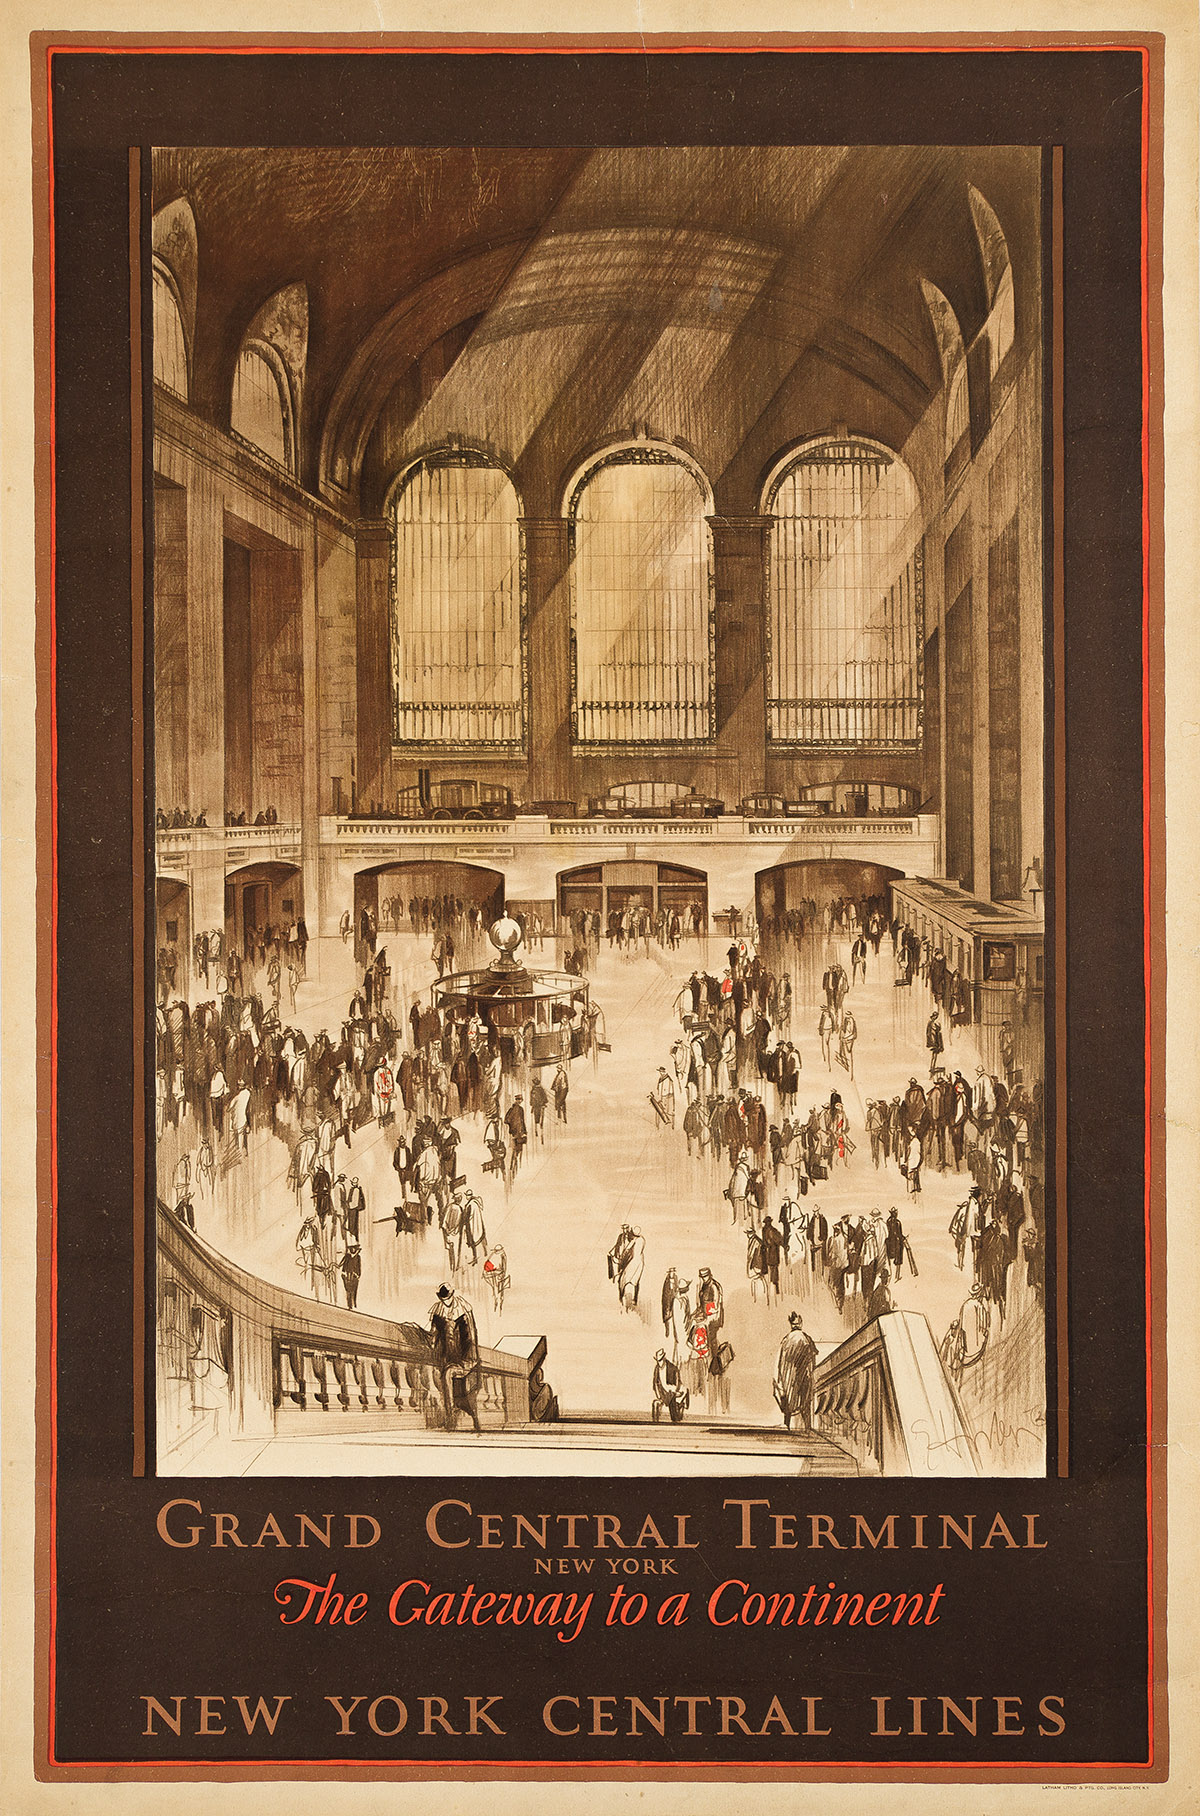 EARL HORTER (1883-1940).  GRAND CENTRAL TERMINAL / THE GATEWAY TO A CONTINENT. 1927. 40½x26¾ inches, 102¾x68 cm. Latham Litho. & Ptg. C